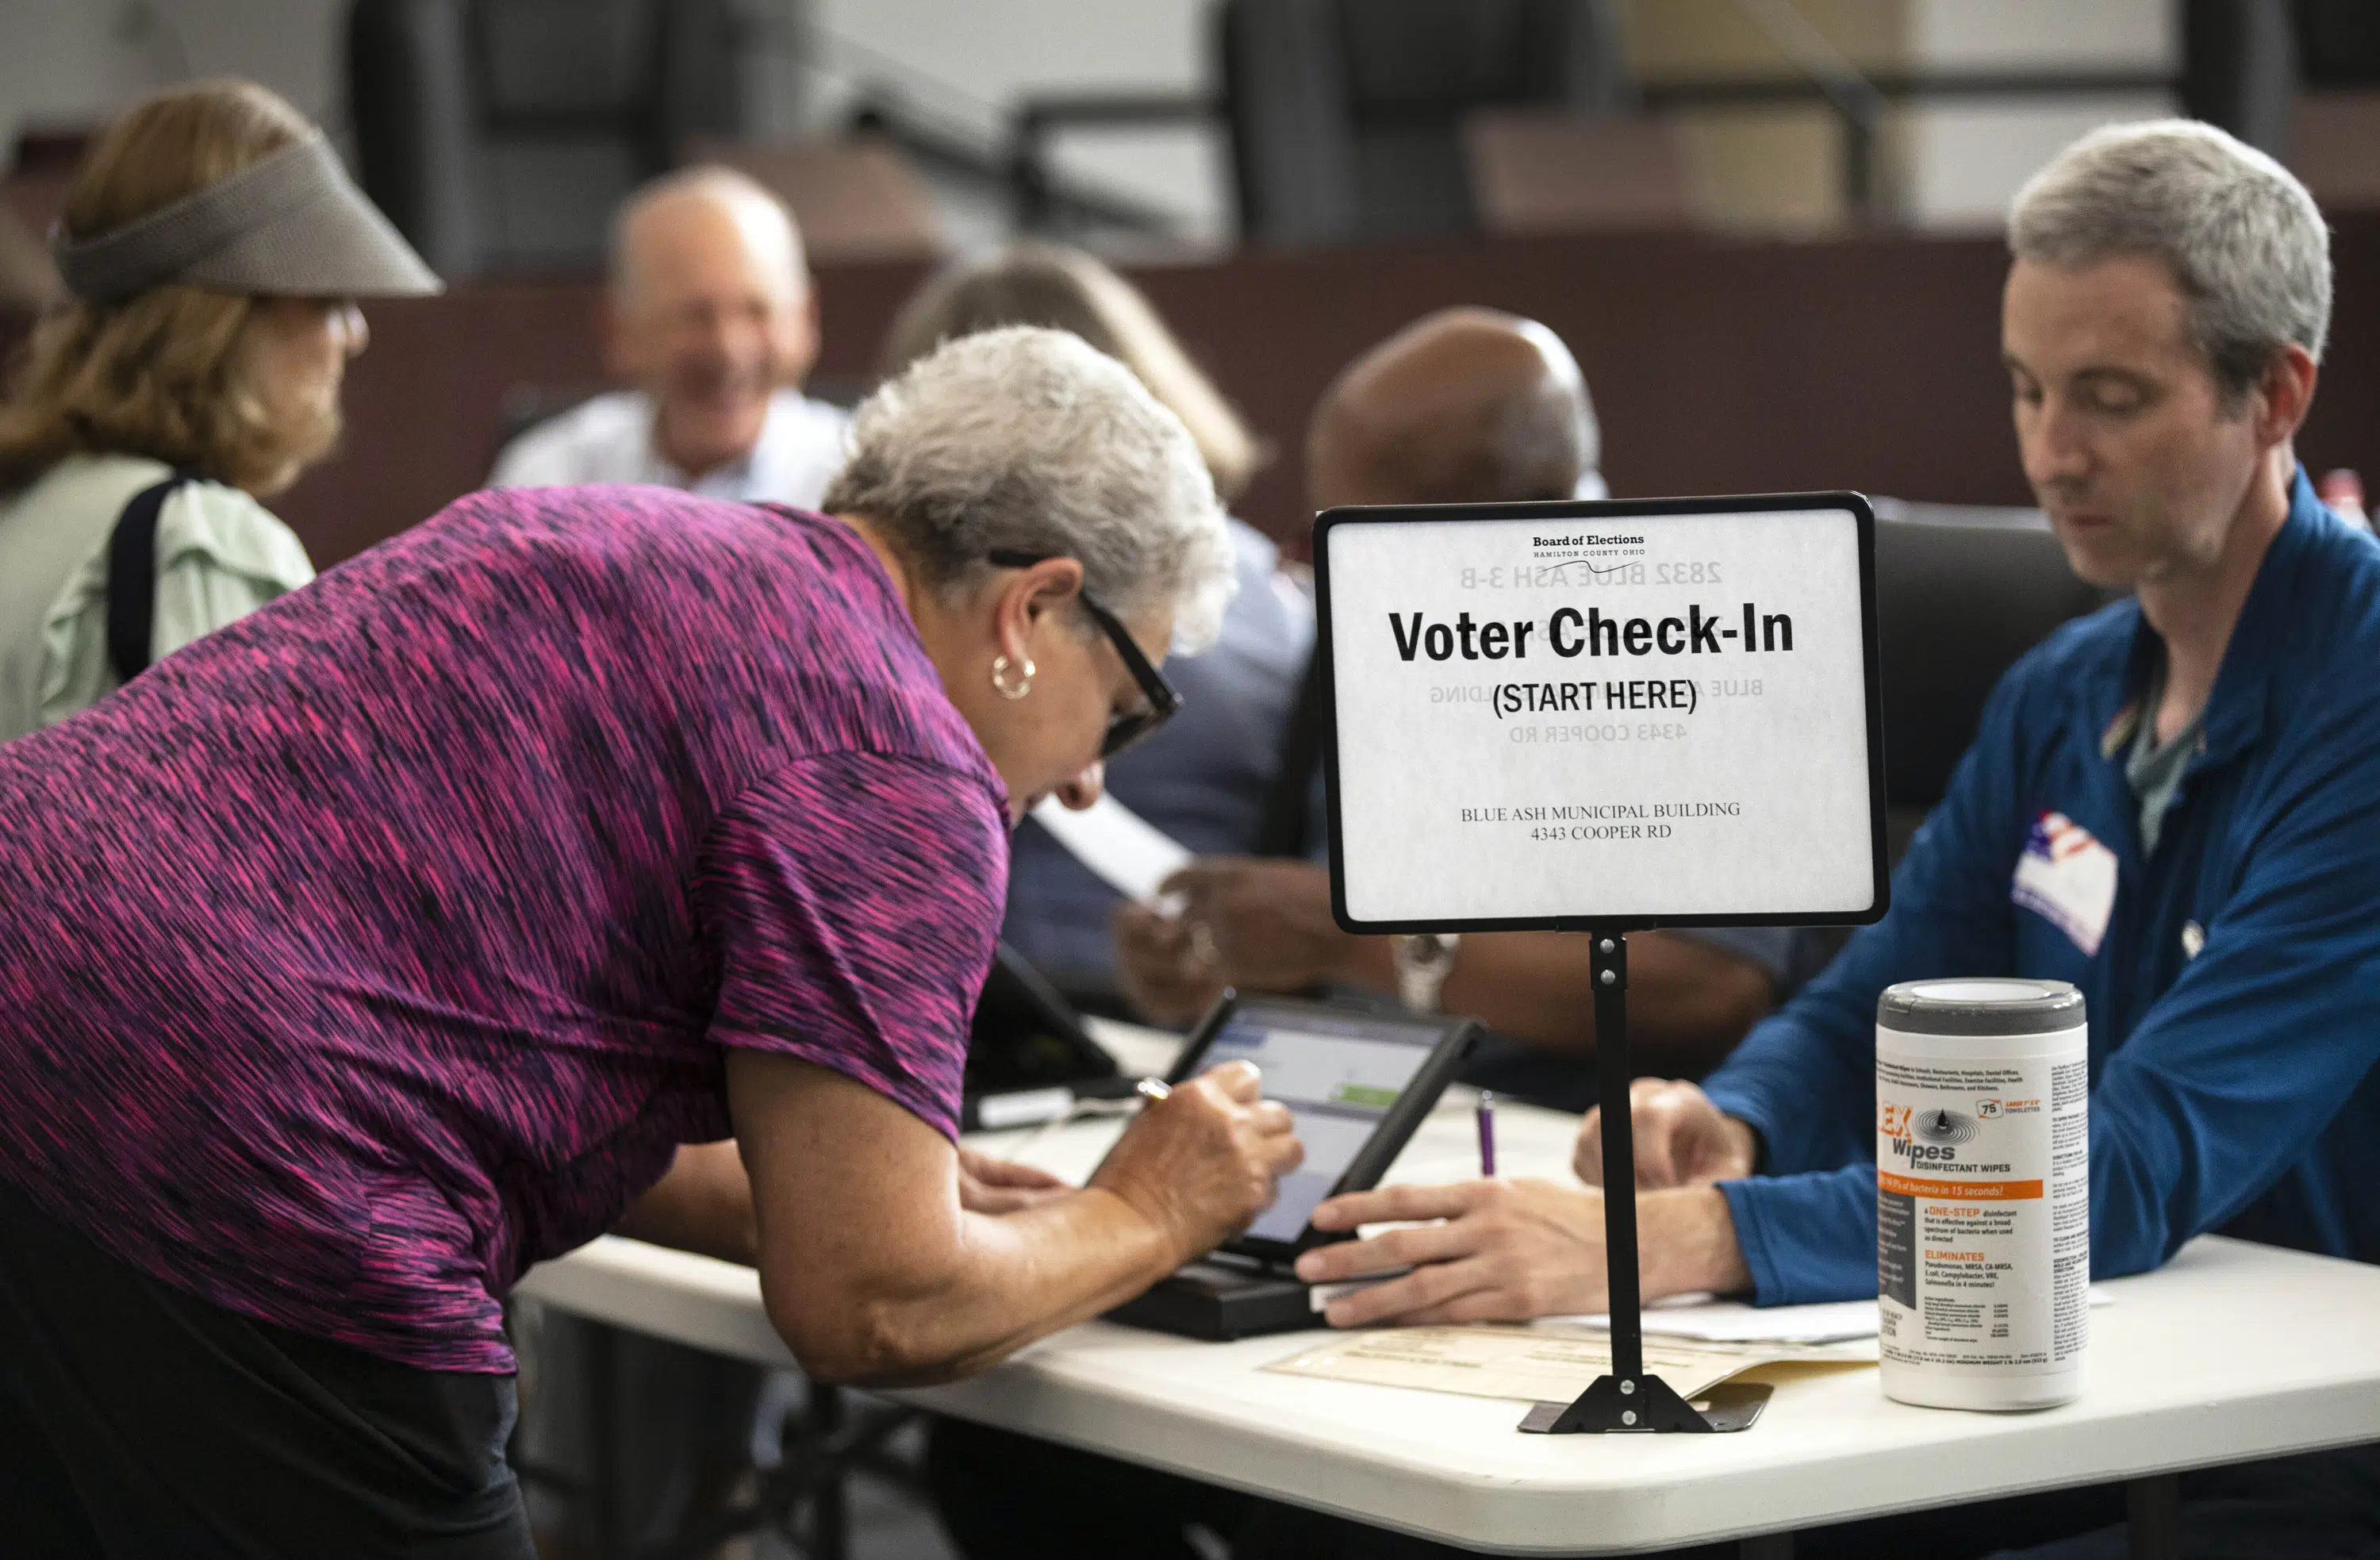 3 GOP states pull out of effort to thwart voter fraud